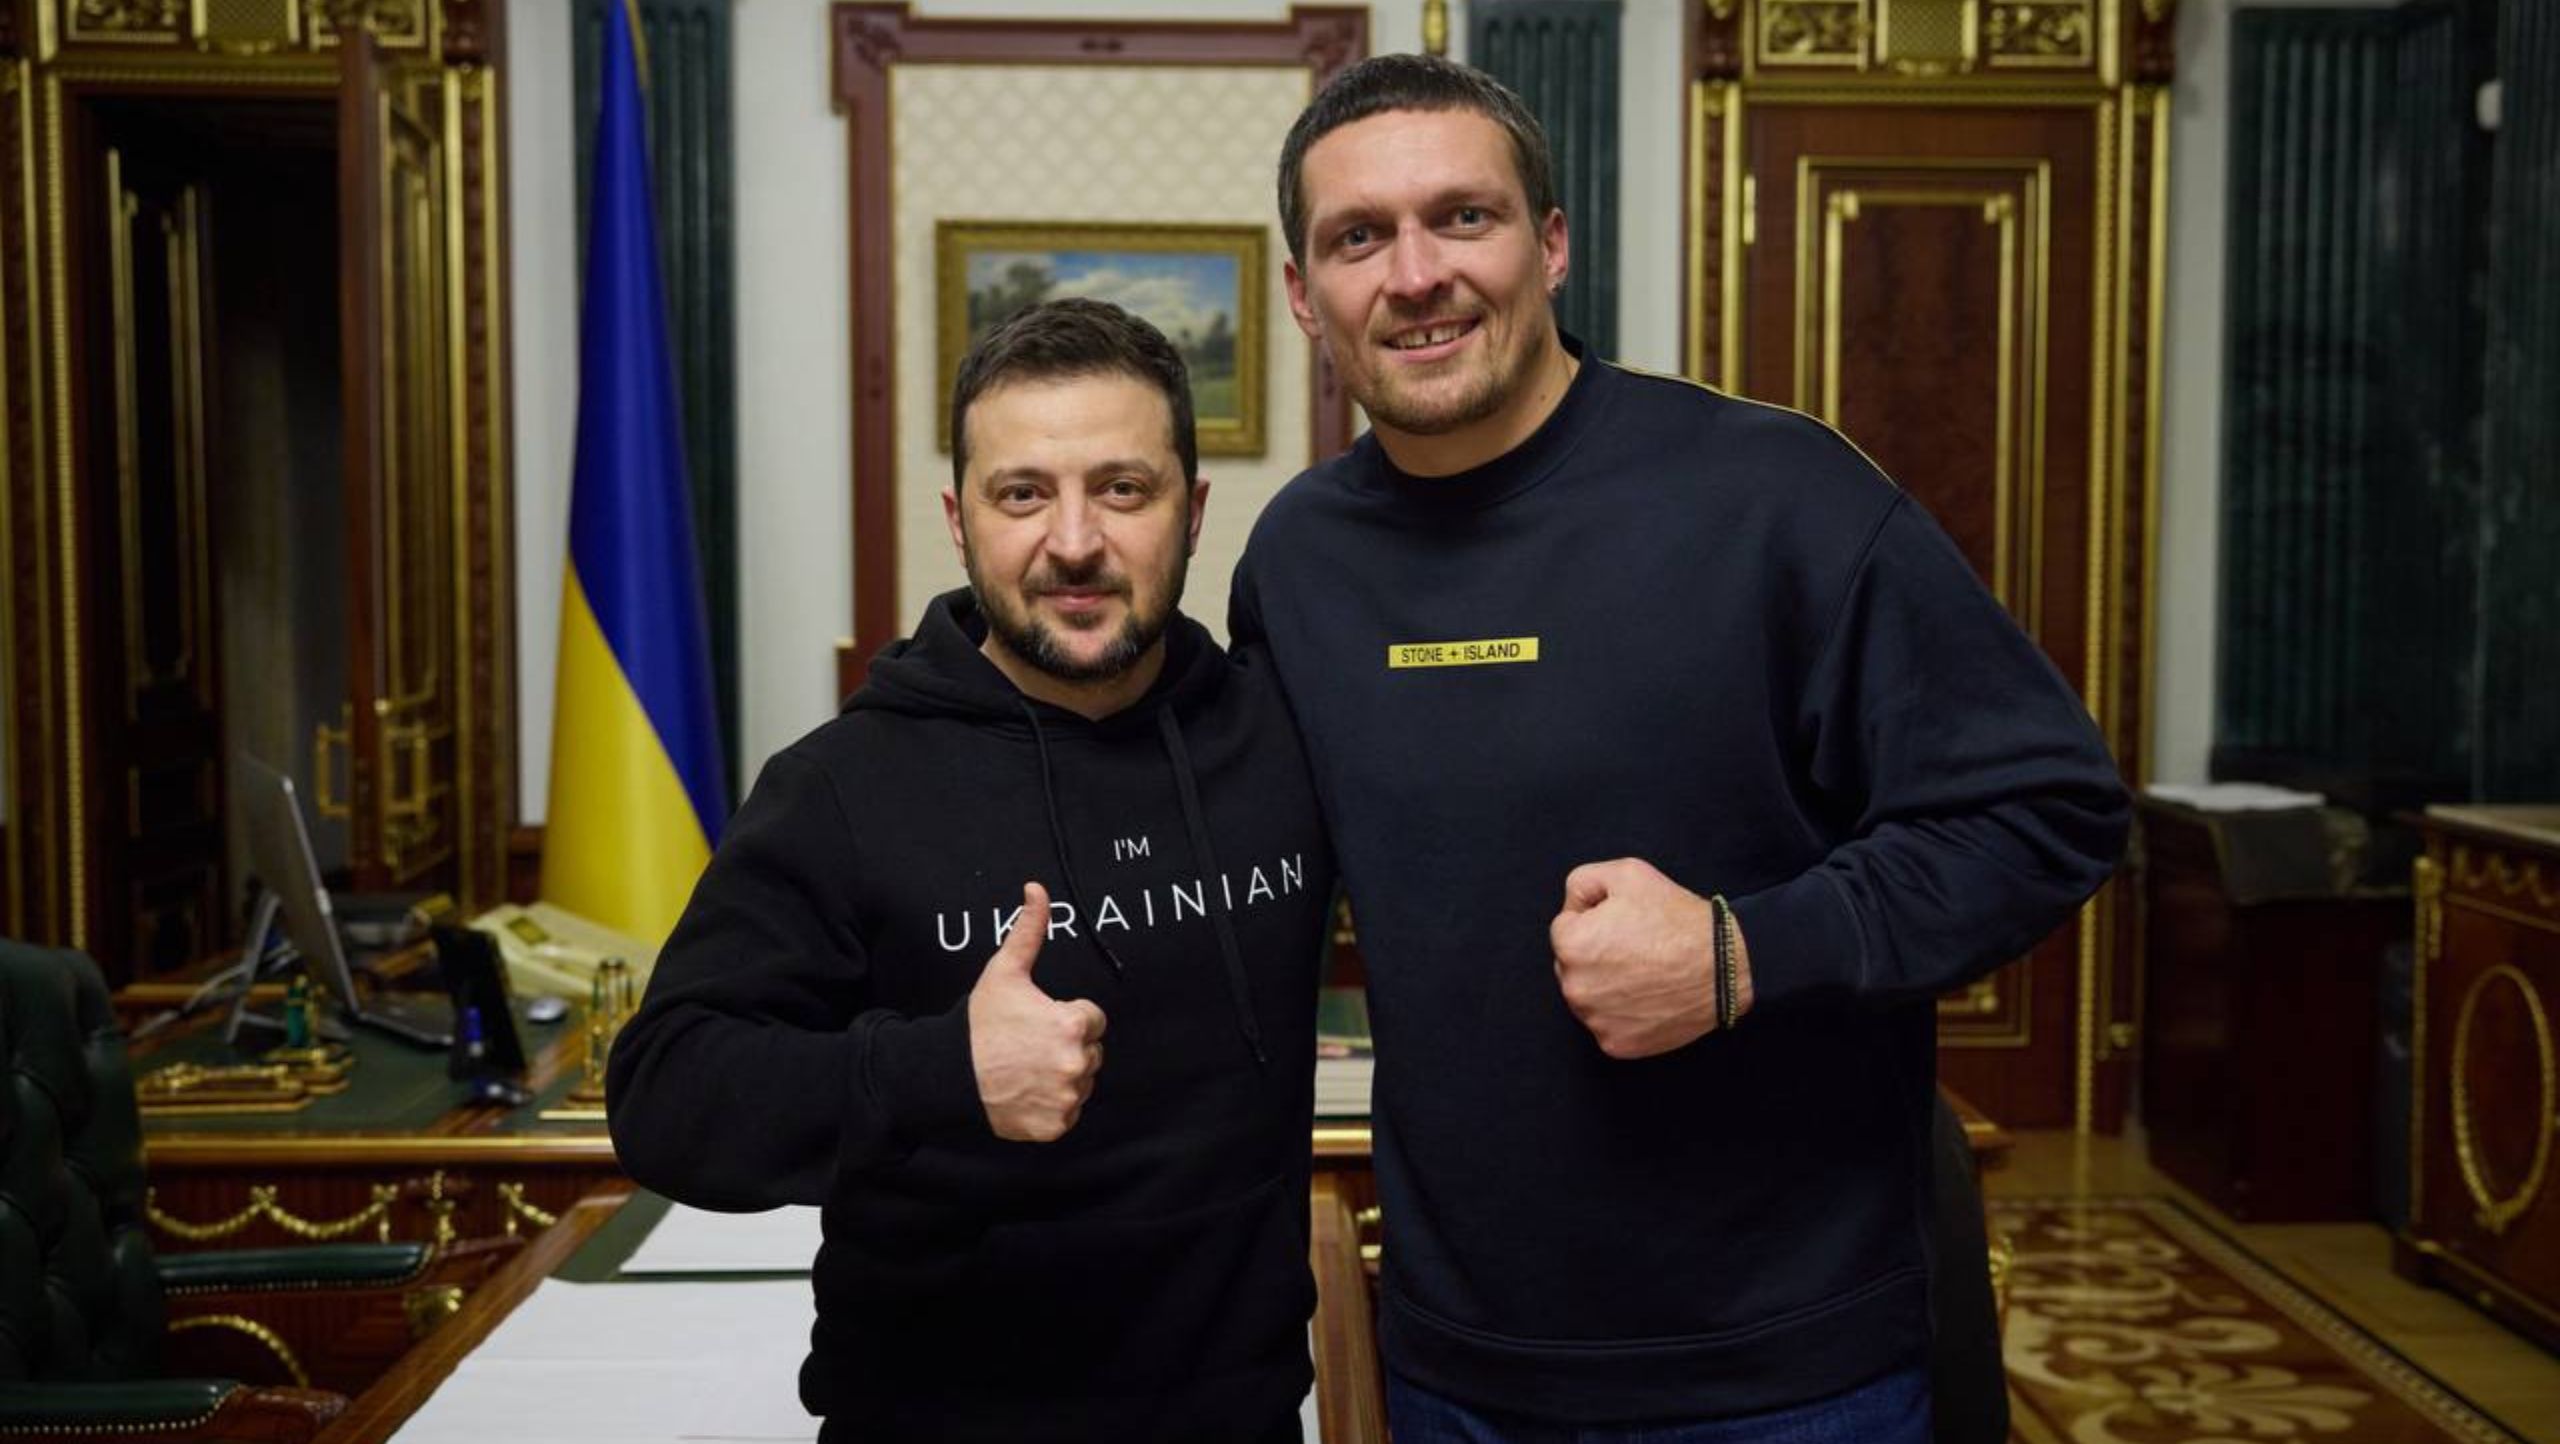 Oleksandr Usyk Made His Own Contribution as Part of the Fundraiser for Generators to Power Ukrainian Hospitals, Transferring $50,000